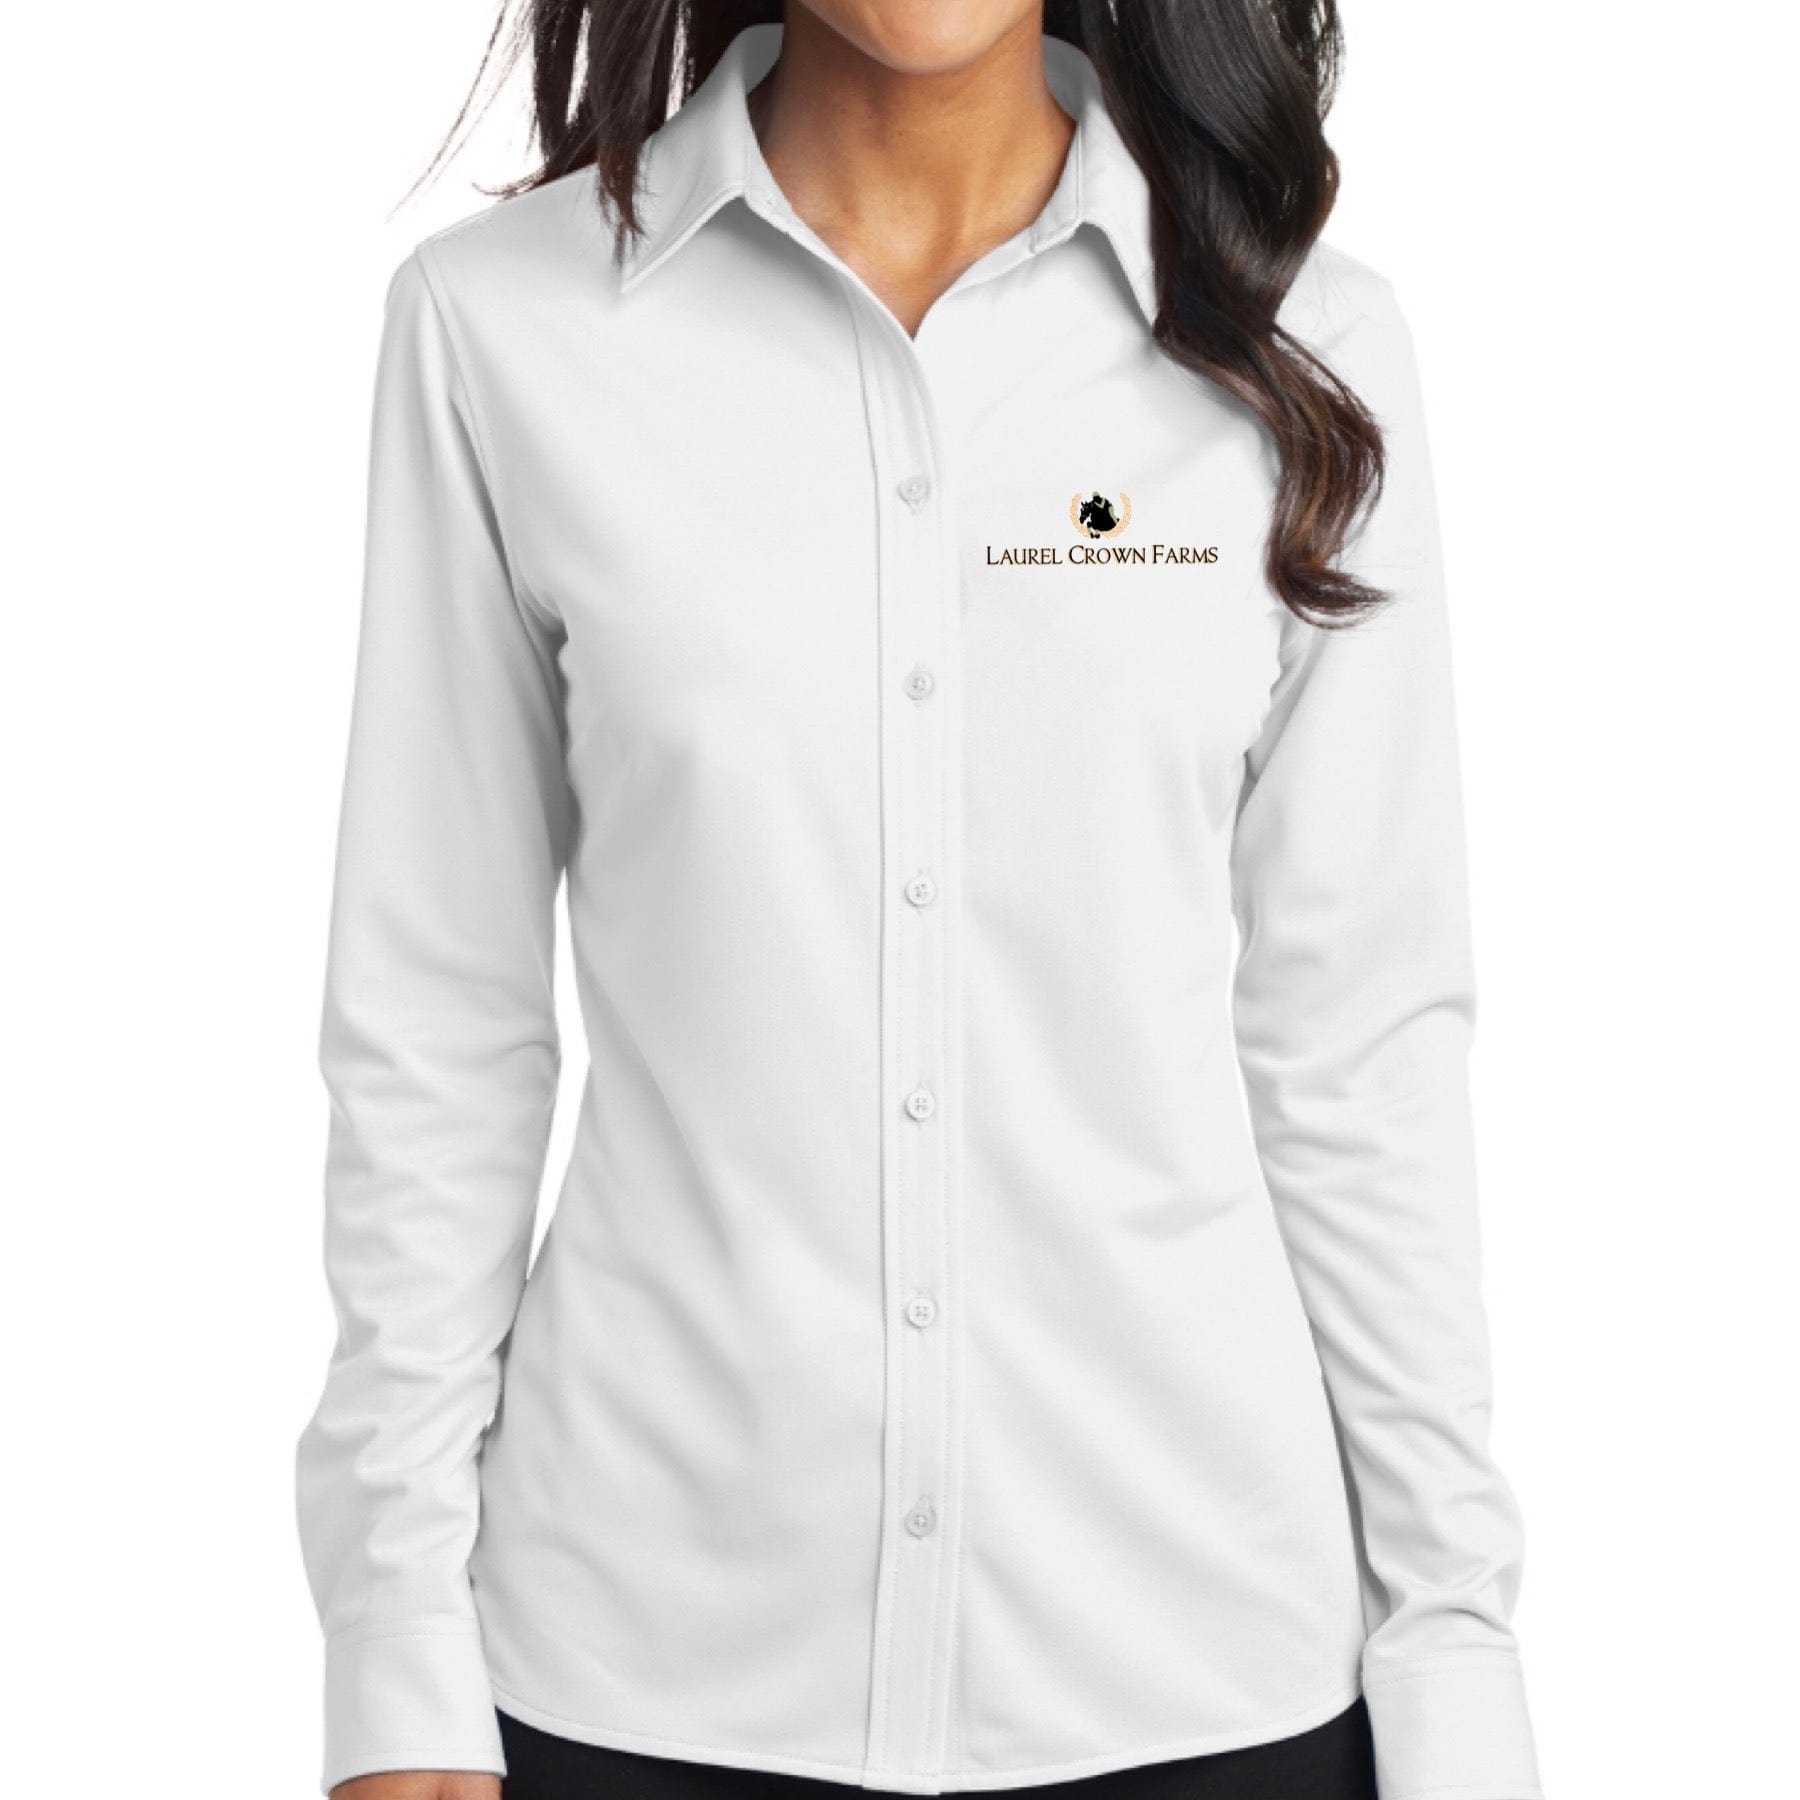 Equestrian Team Apparel Laurel Crown Farms Dress Shirt equestrian team apparel online tack store mobile tack store custom farm apparel custom show stable clothing equestrian lifestyle horse show clothing riding clothes horses equestrian tack store